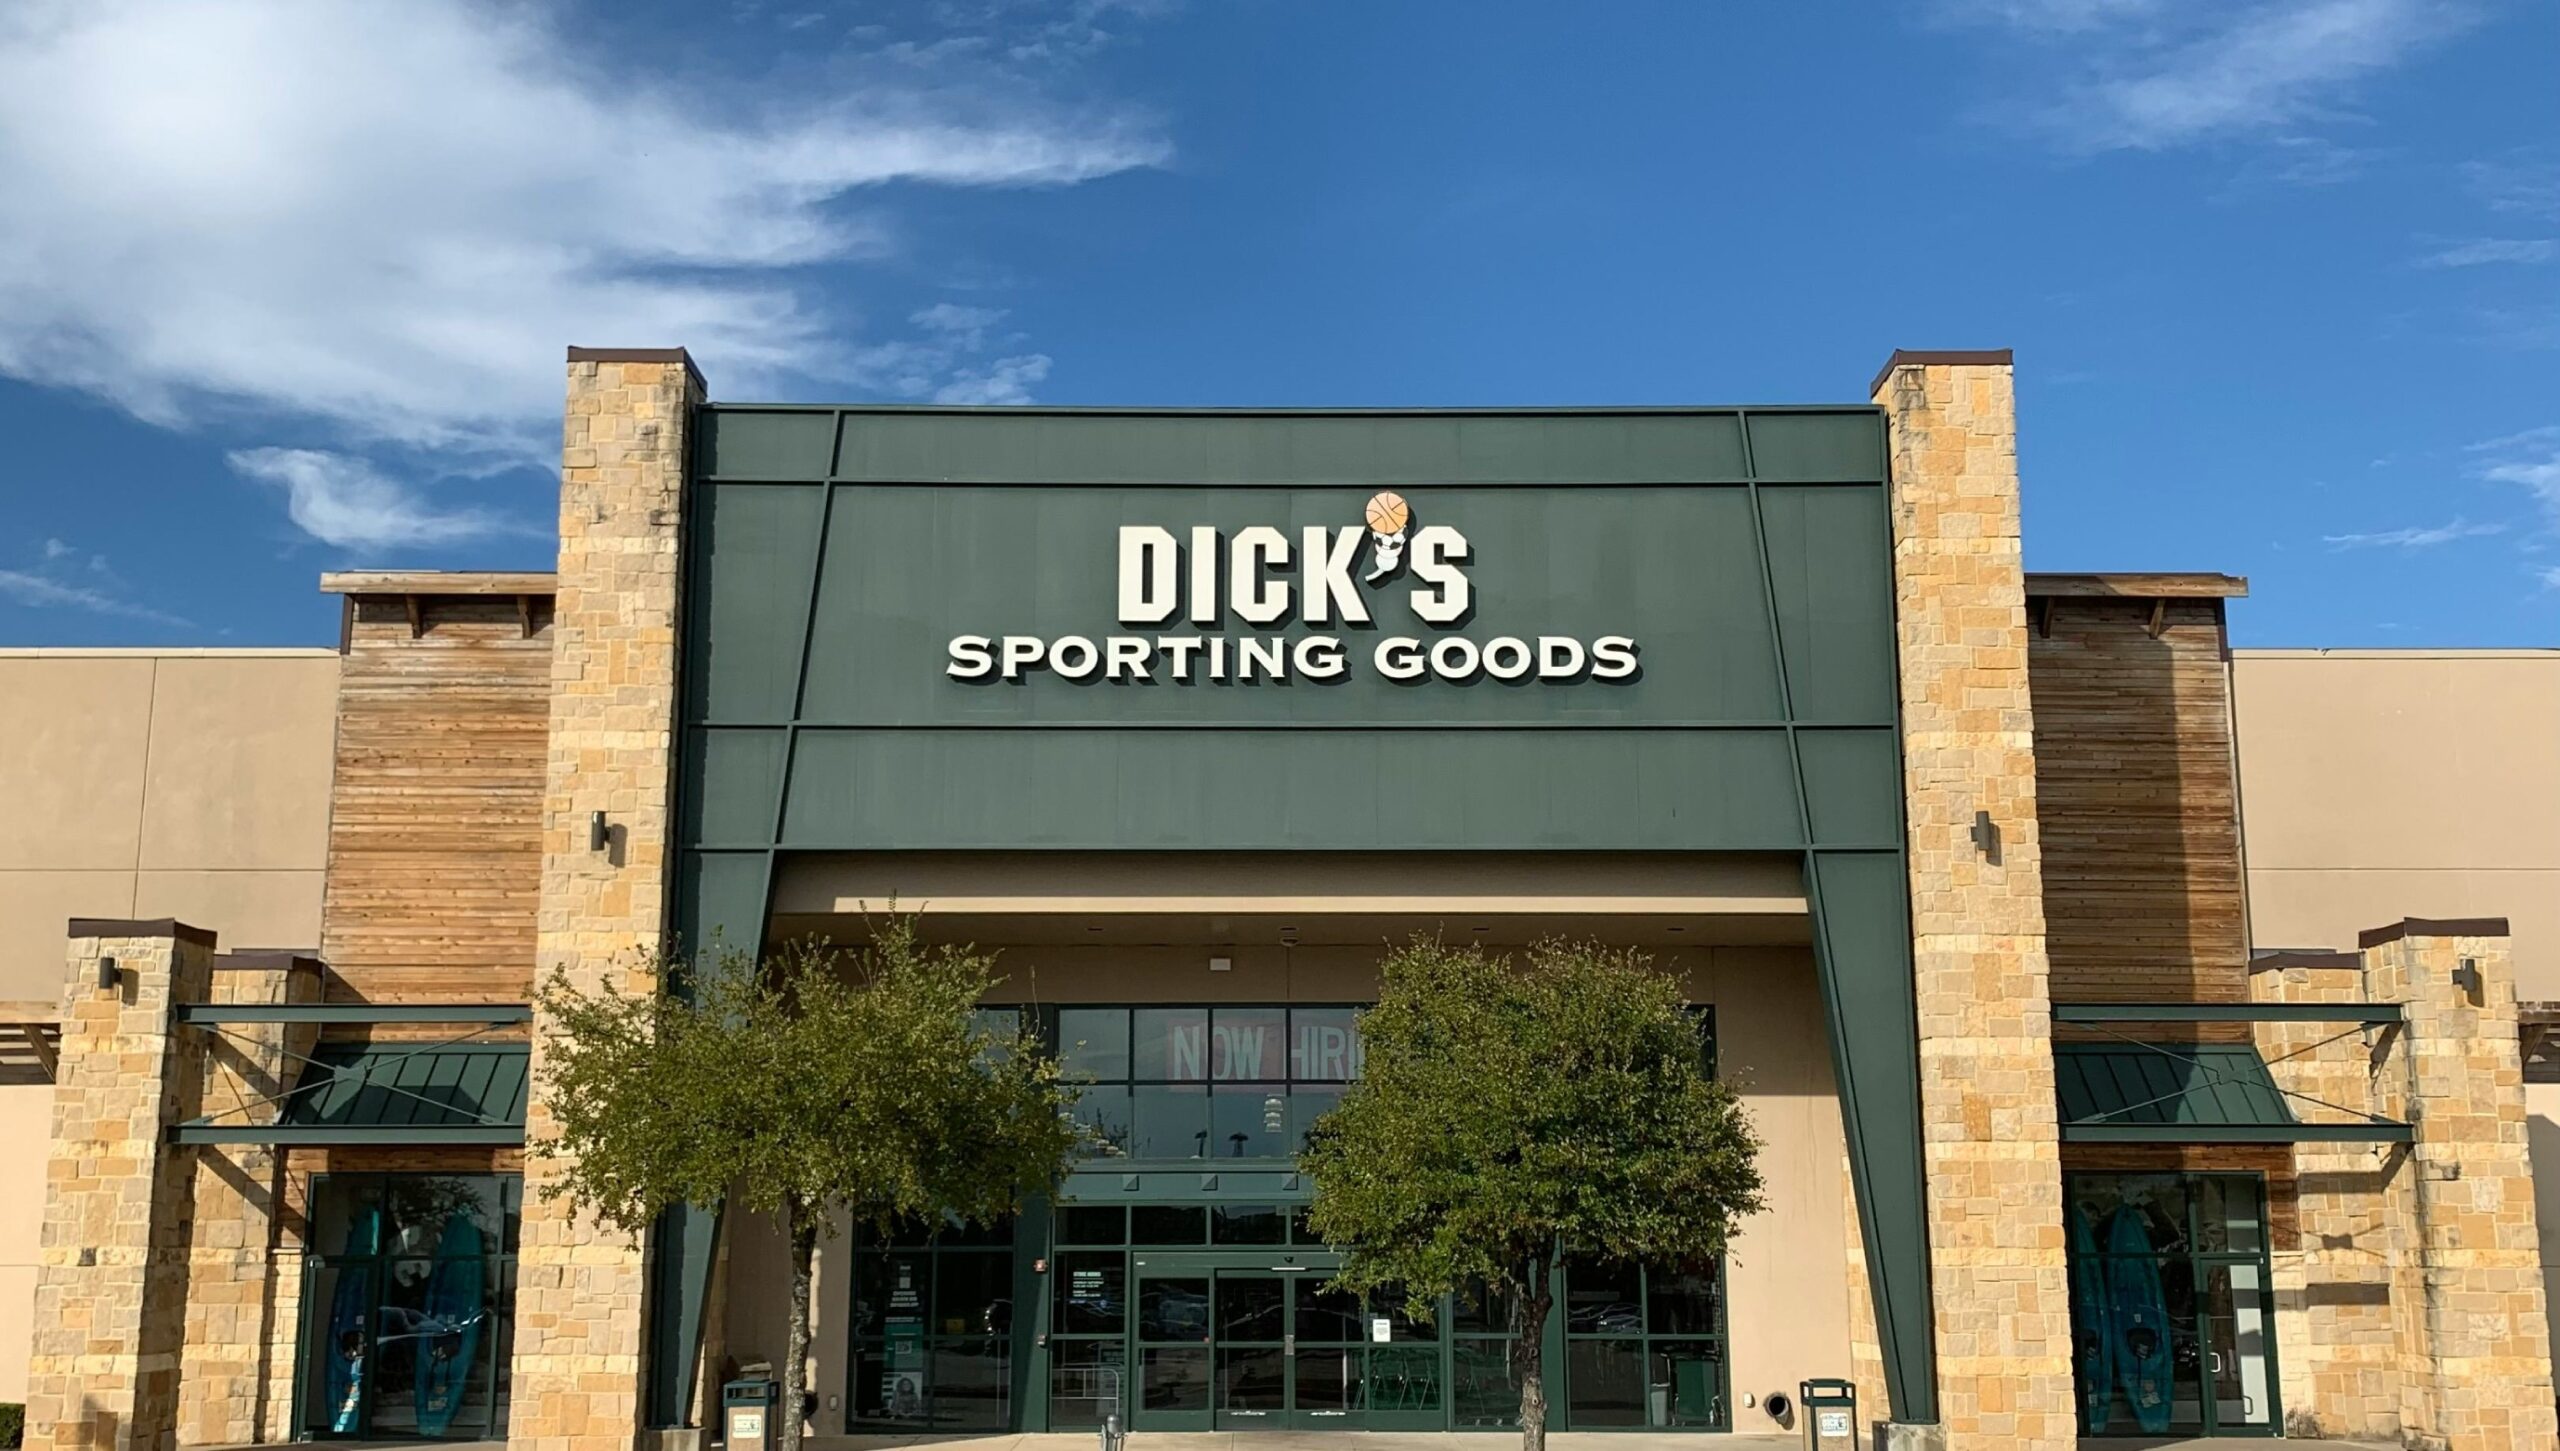 What Time Does Dick's Sporting Goods Close?